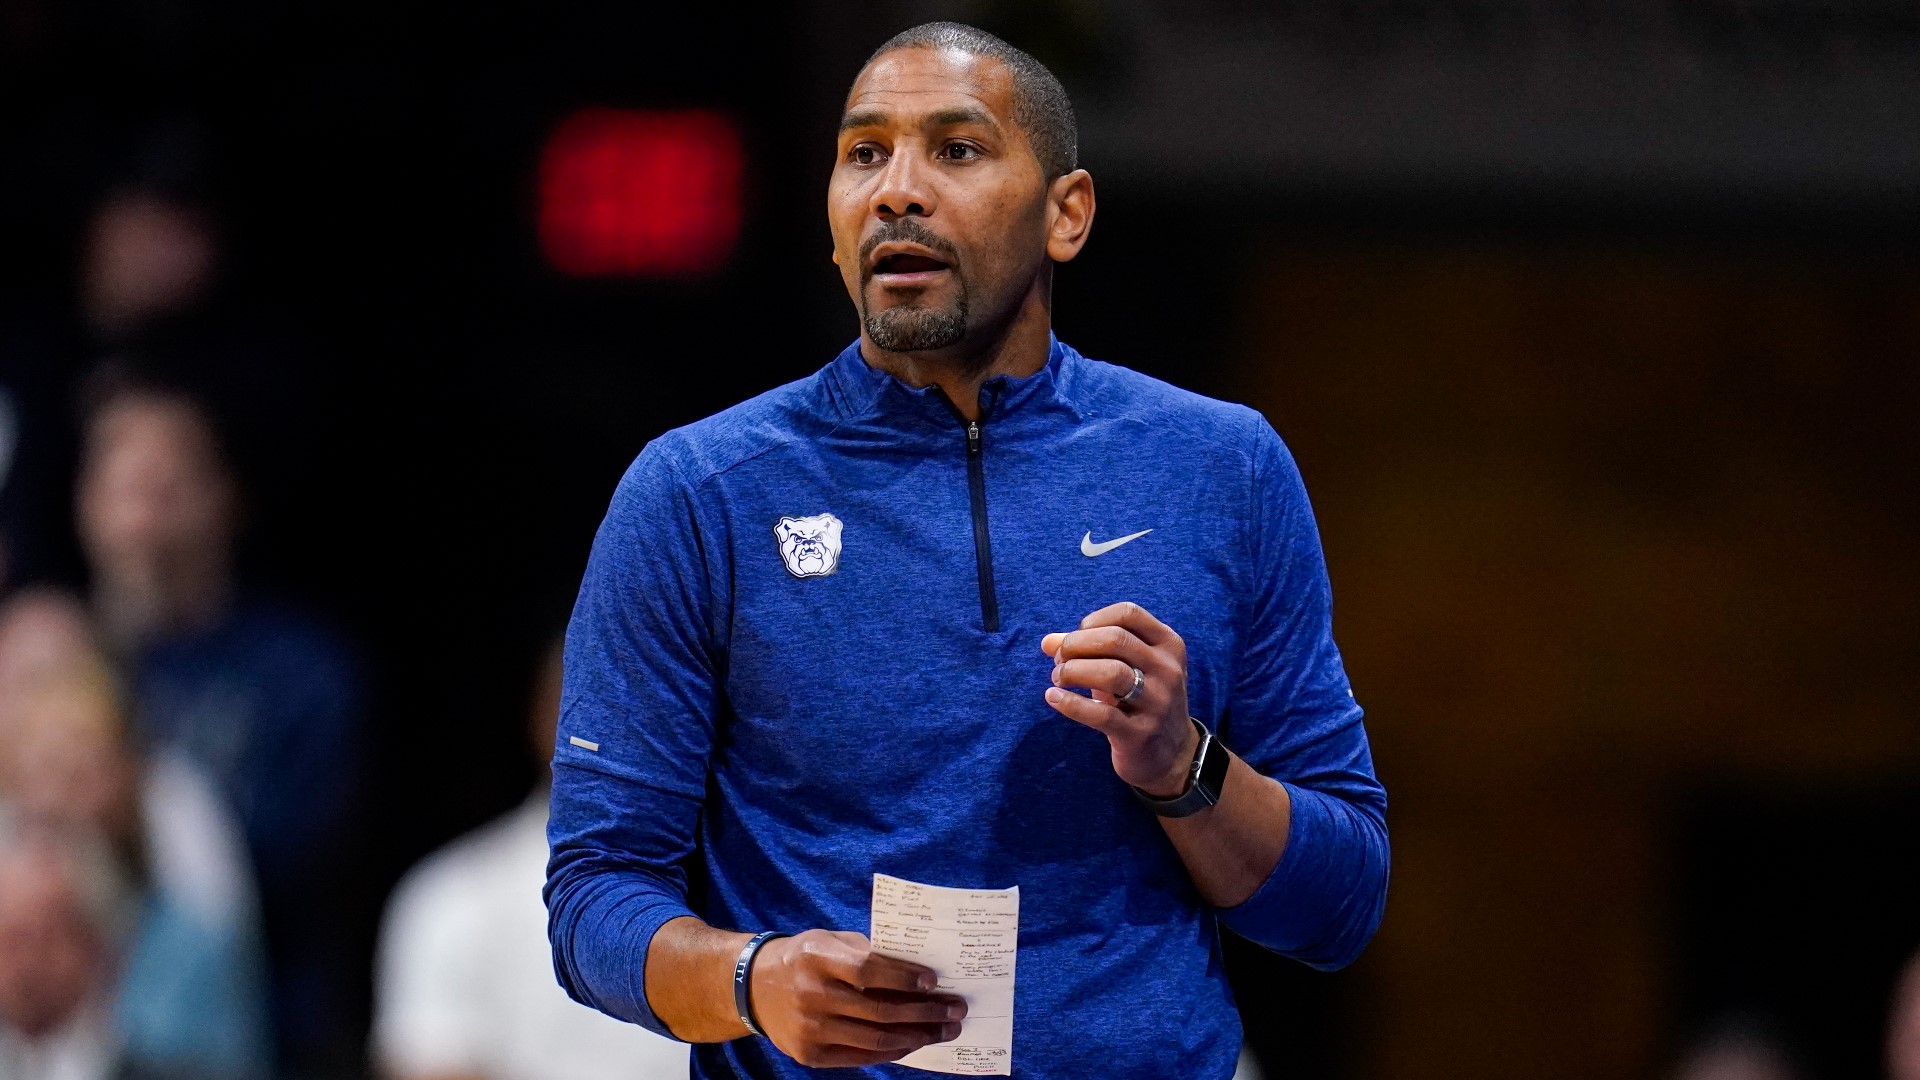 Butler University and men's basketball coach LaVall Jordan have parted ways after five seasons, the university announced Friday.